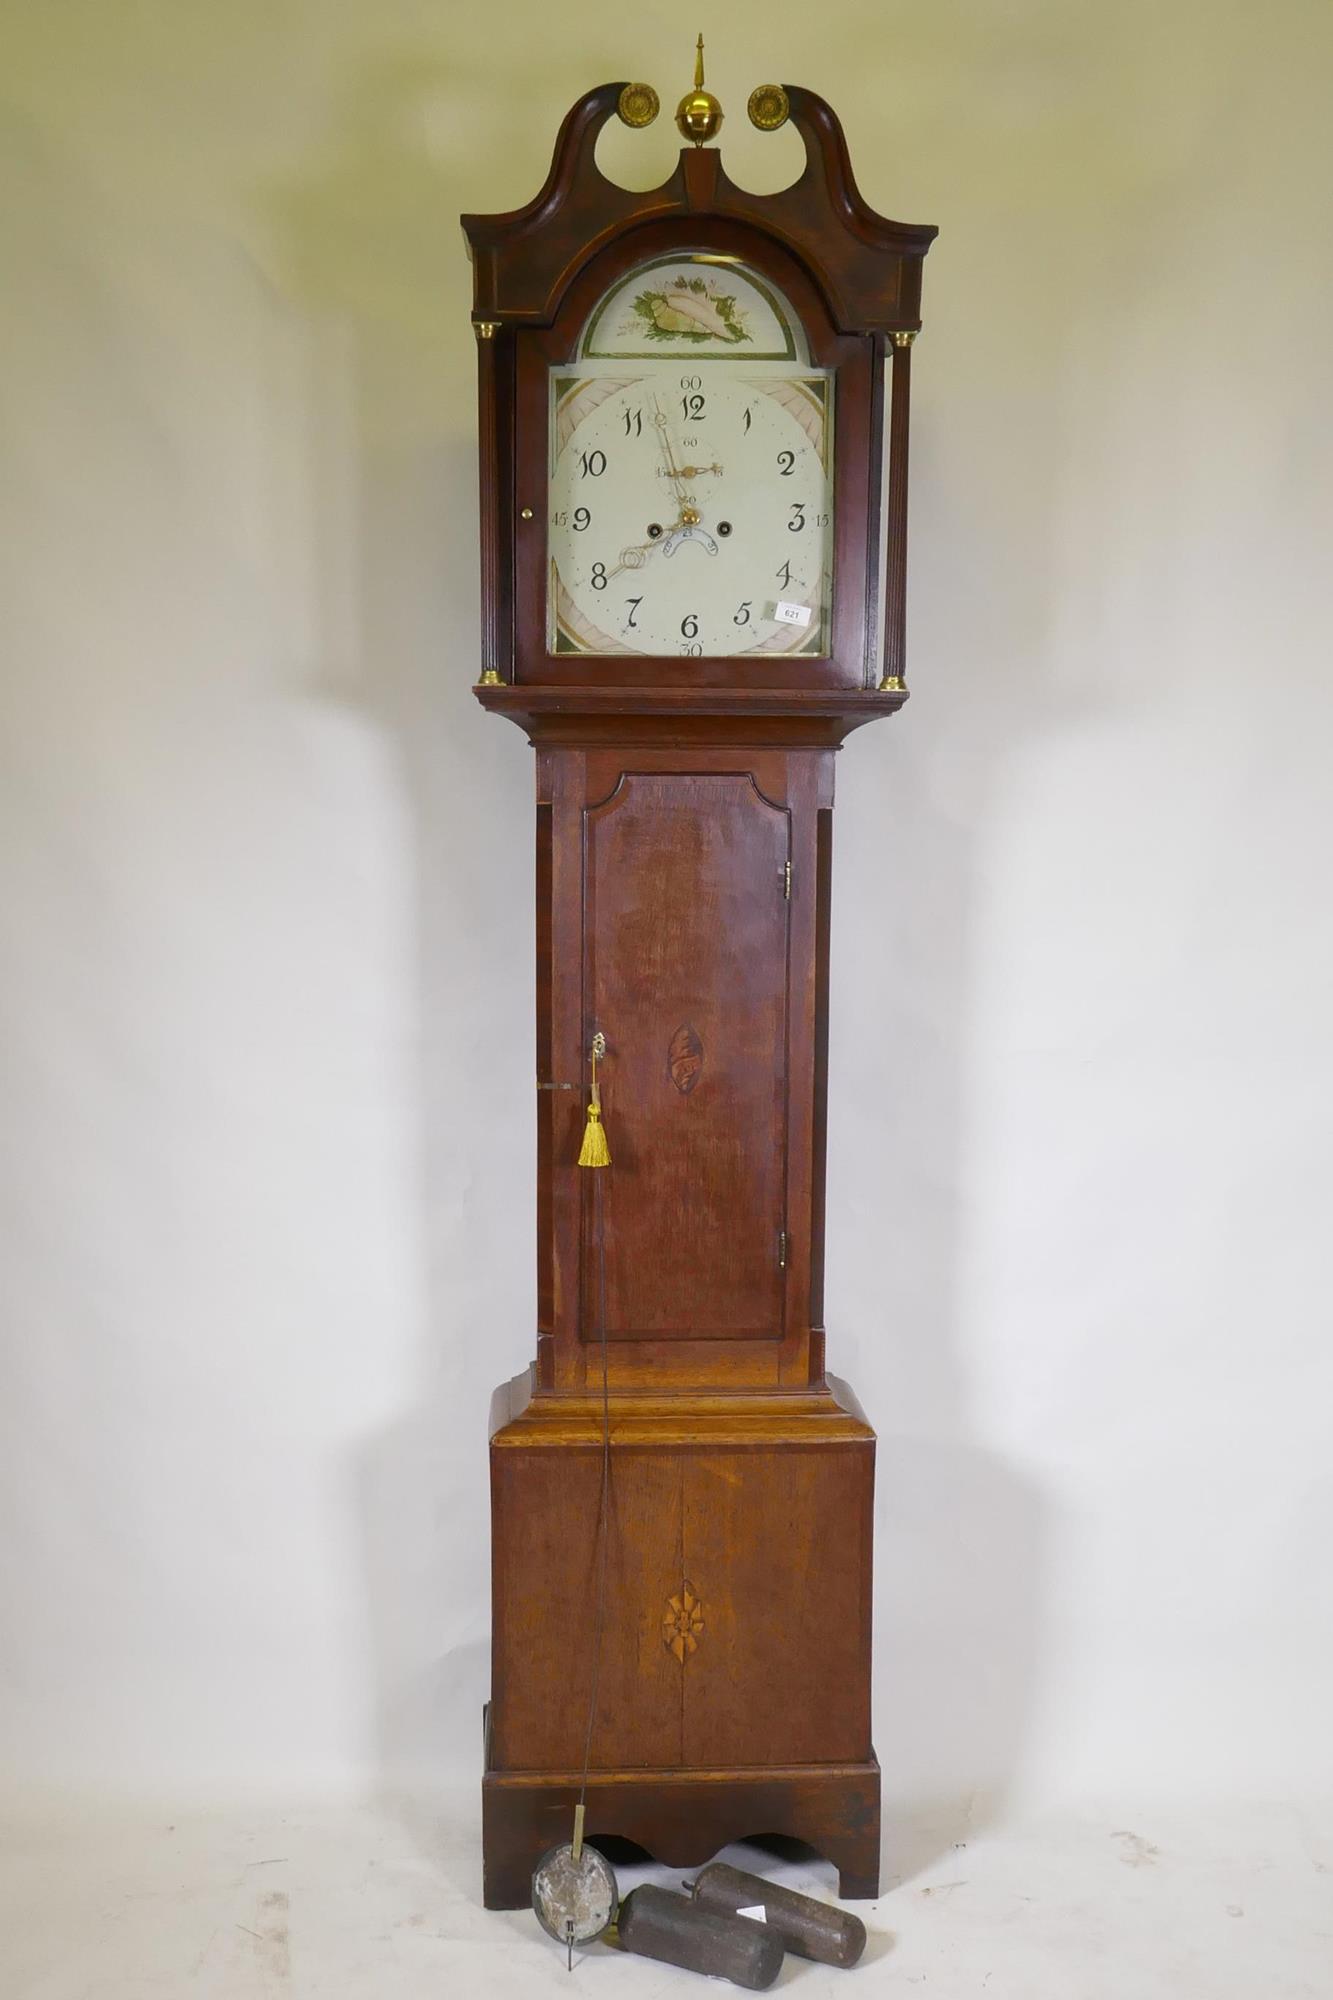 C19th oak long case clock, the case with banded veneer, and inlaid shell decoration, the painted